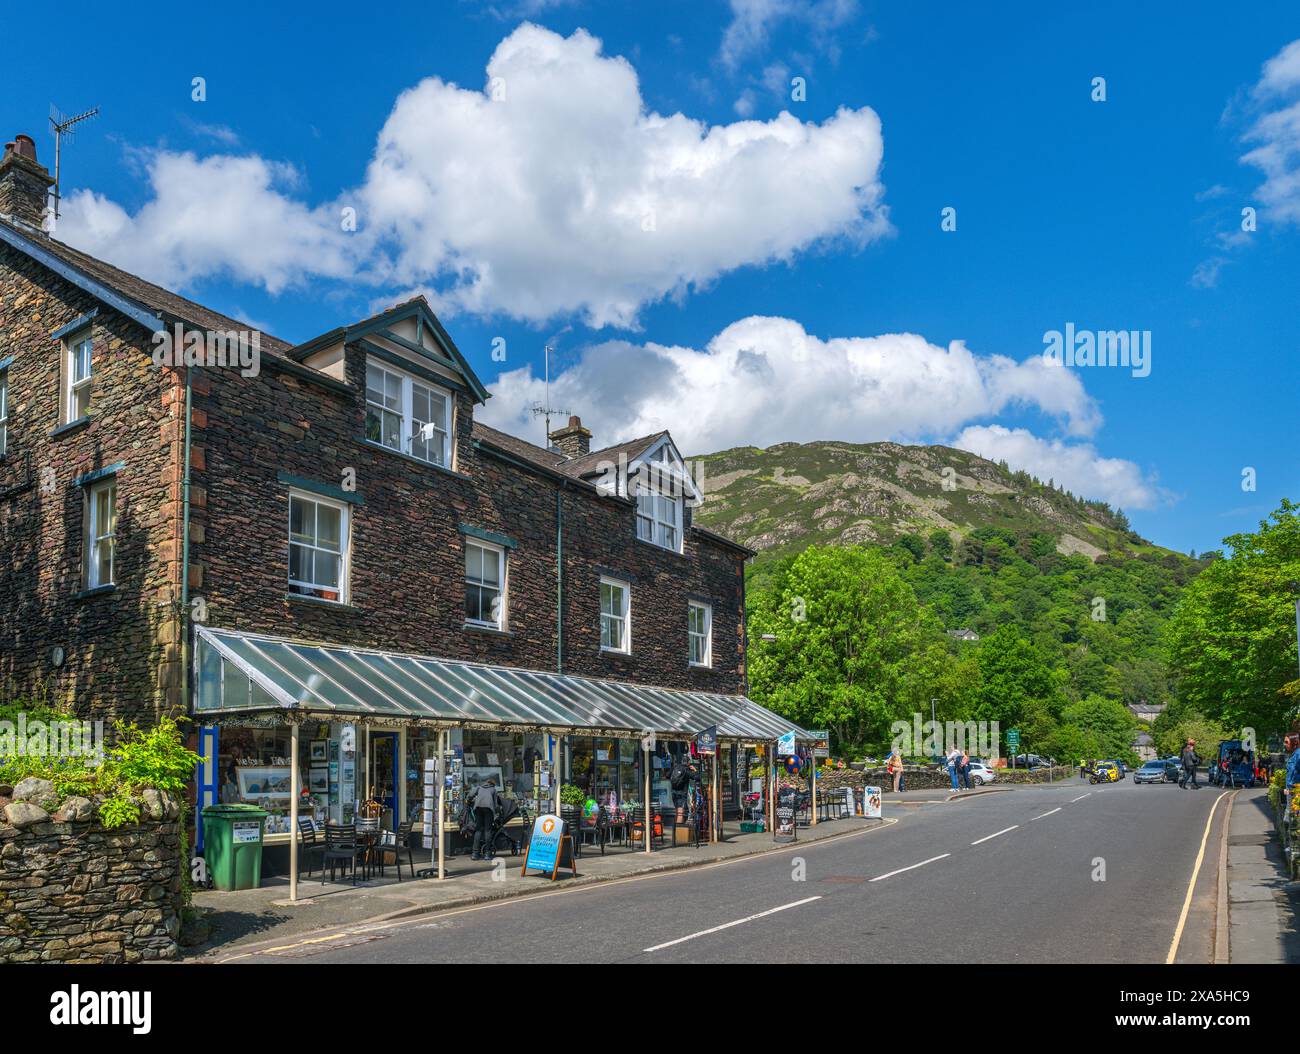 Shops on A 592 in Glenridding, Ullswater, Lake District, Cumbria, UK Stock Photo